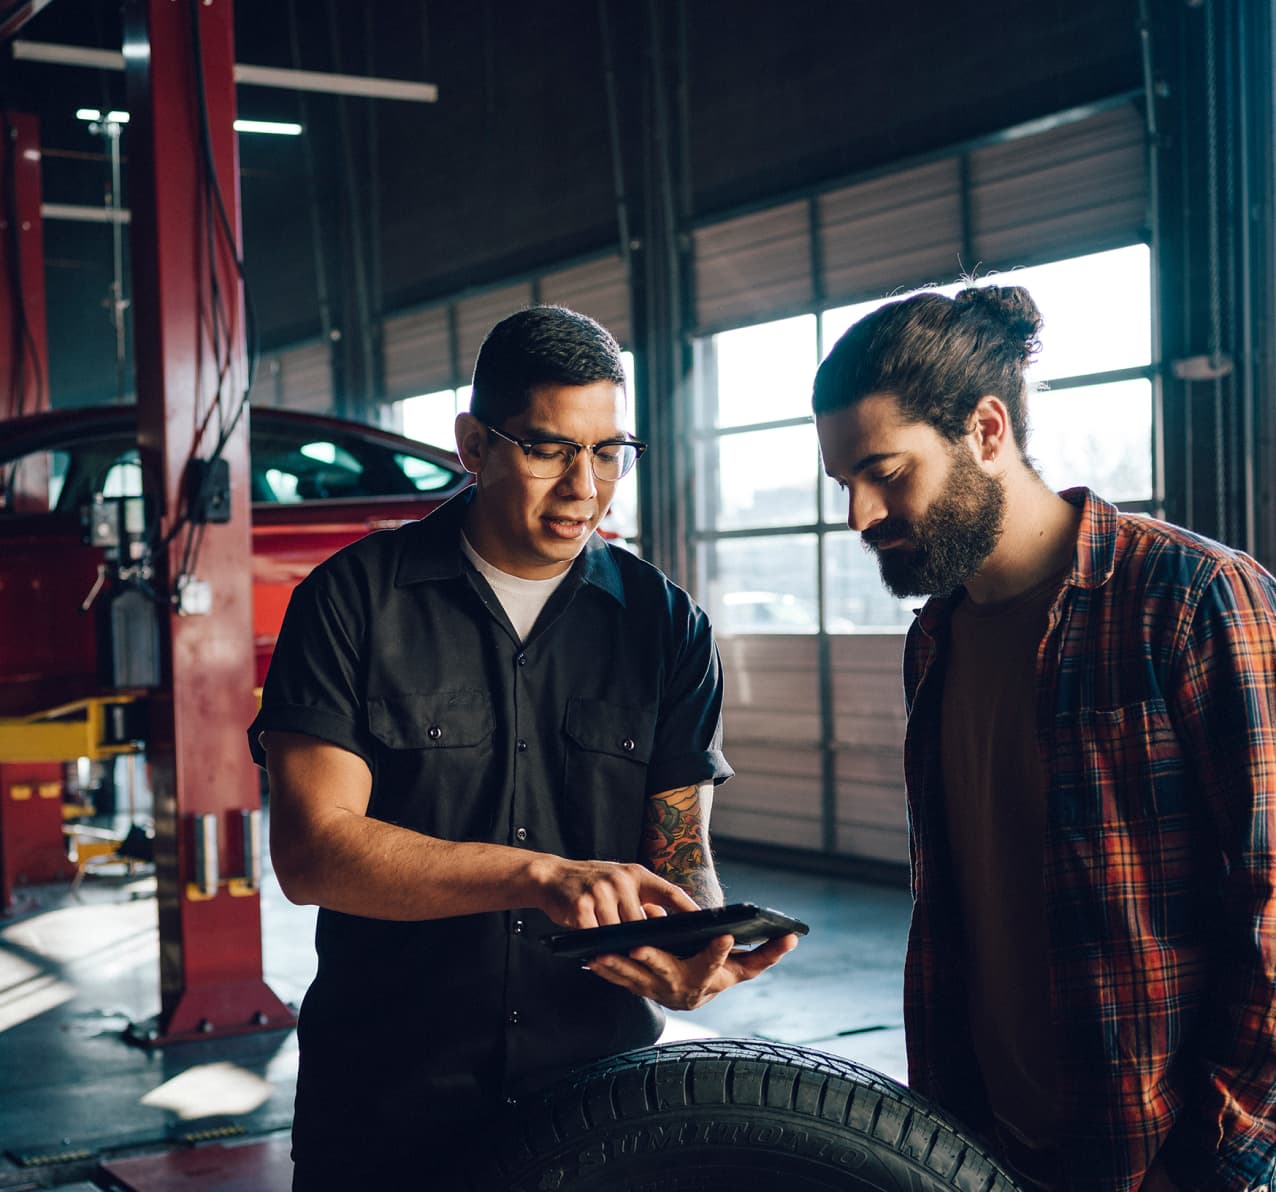 Two men in an auto body shop